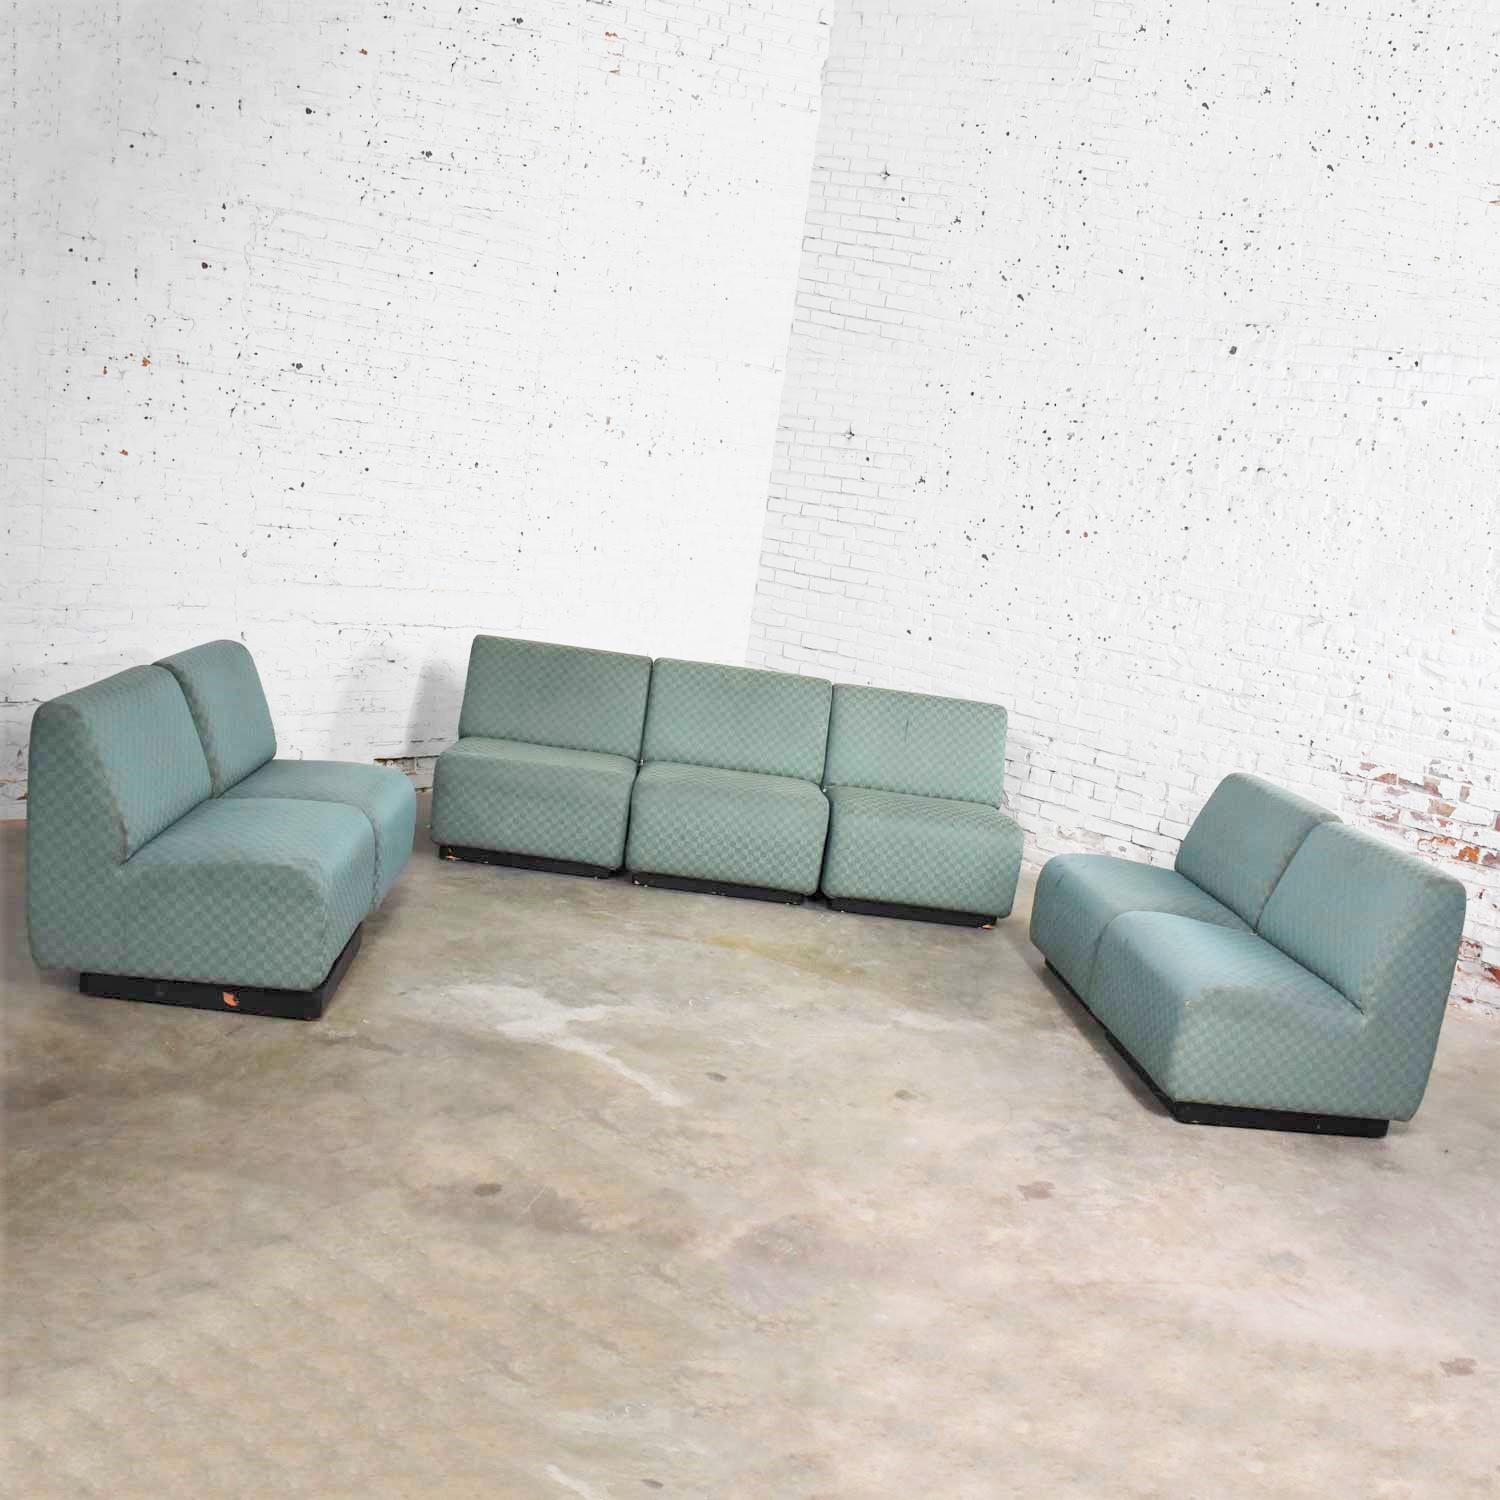 20th Century August Inc Modern Modular Sectional Sofa Straight & Wedge Pieces Style Chadwick For Sale